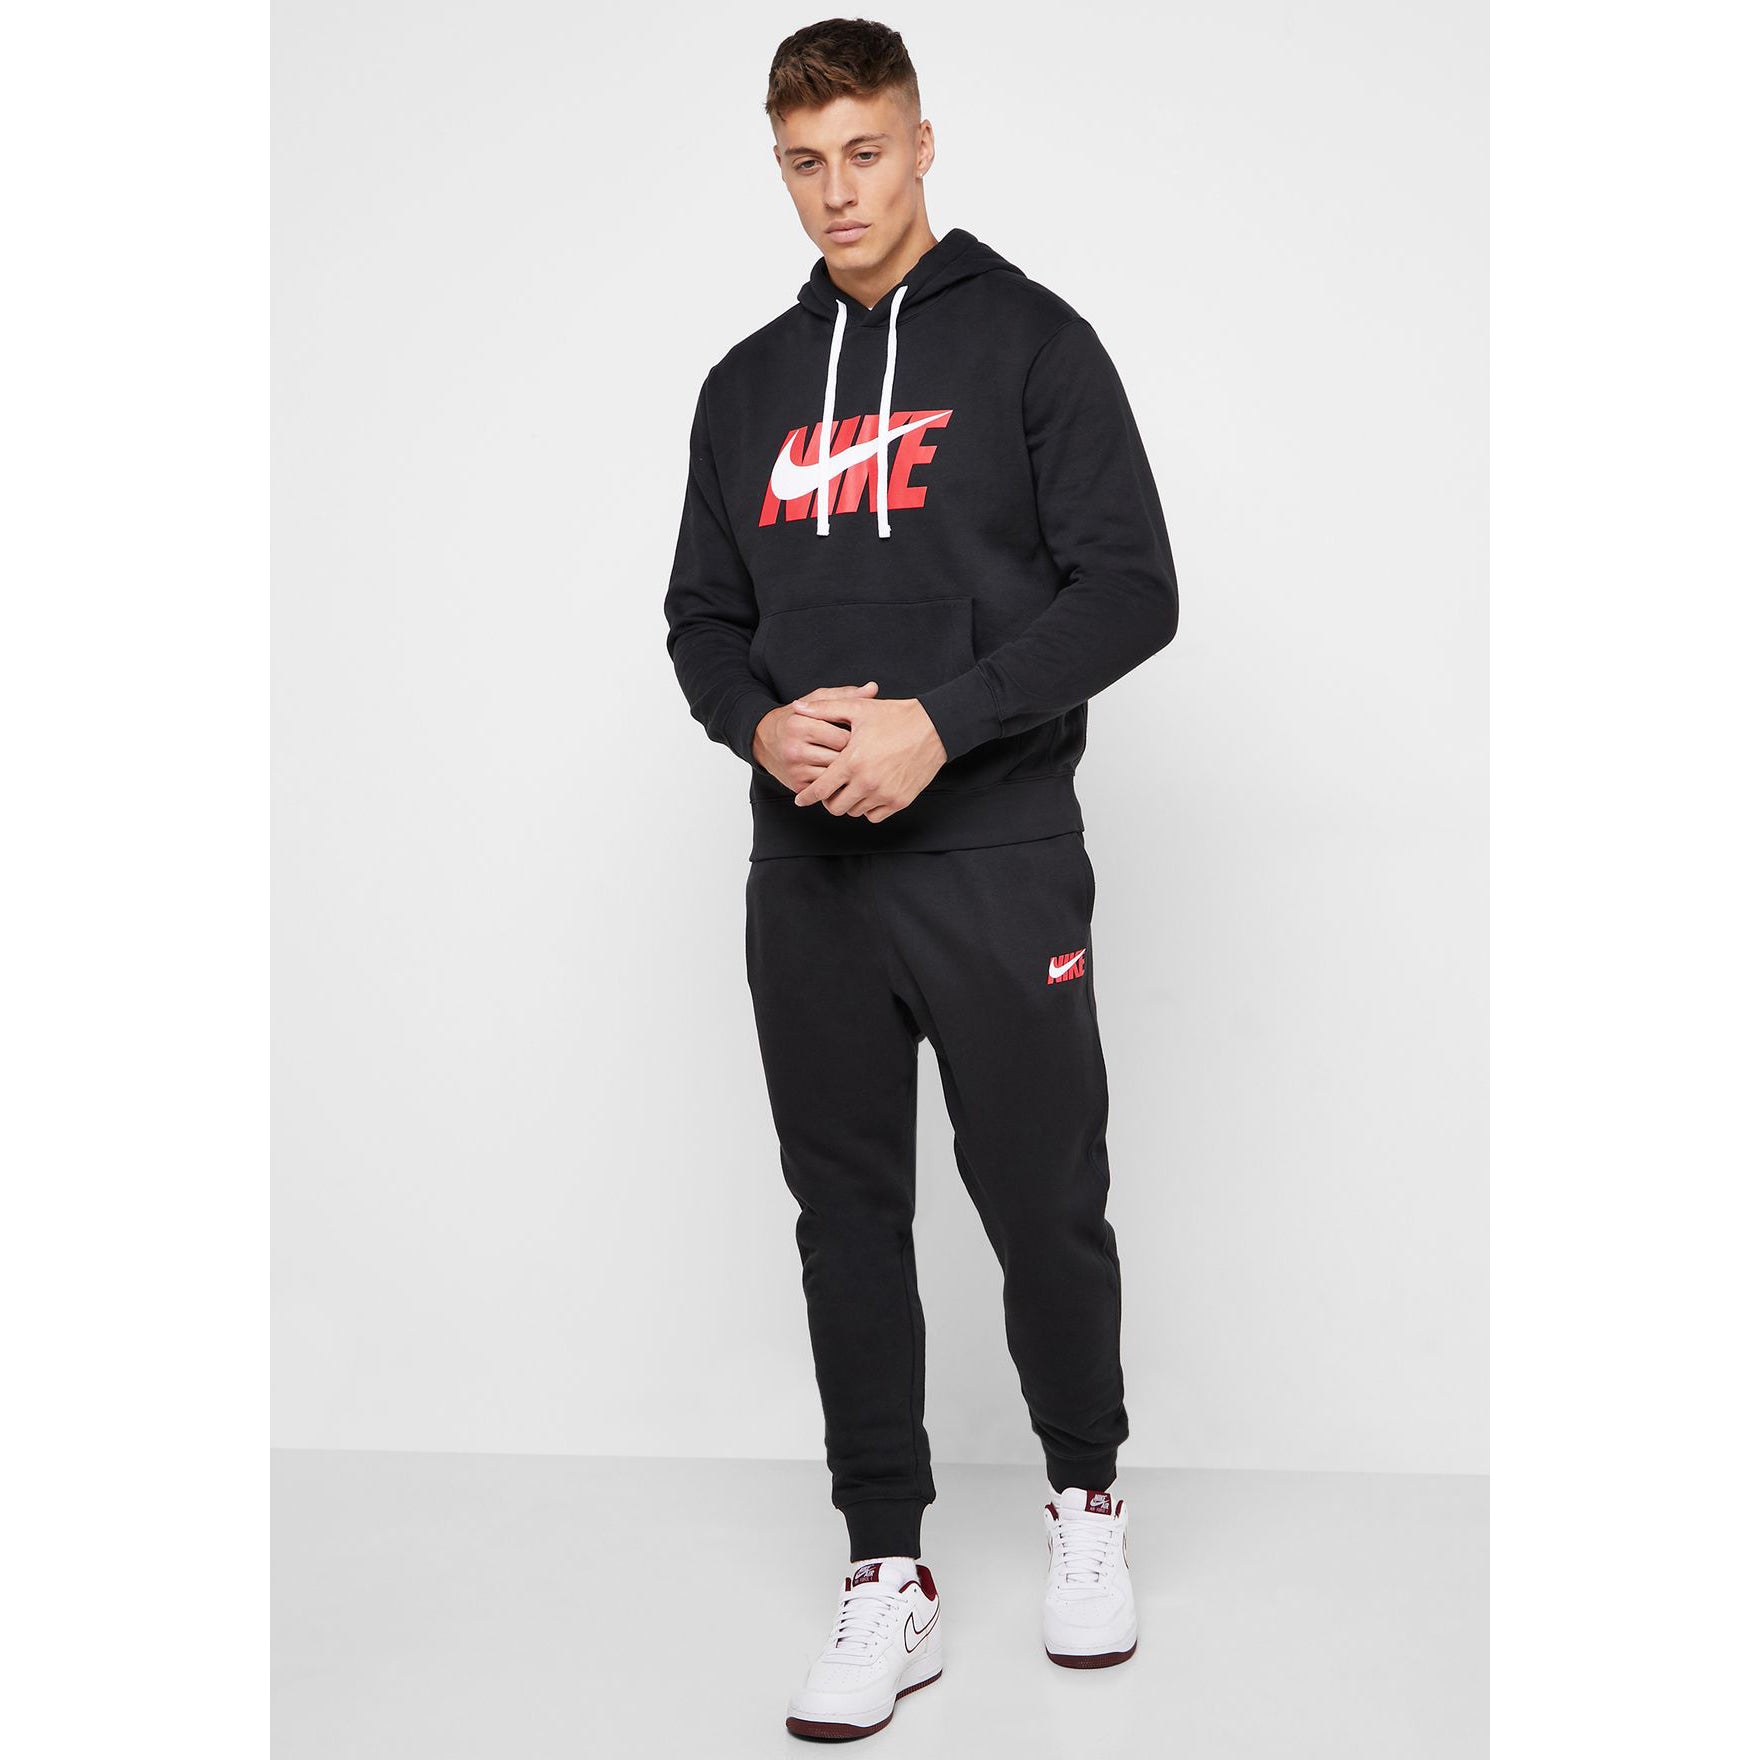 red black and white nike tracksuit